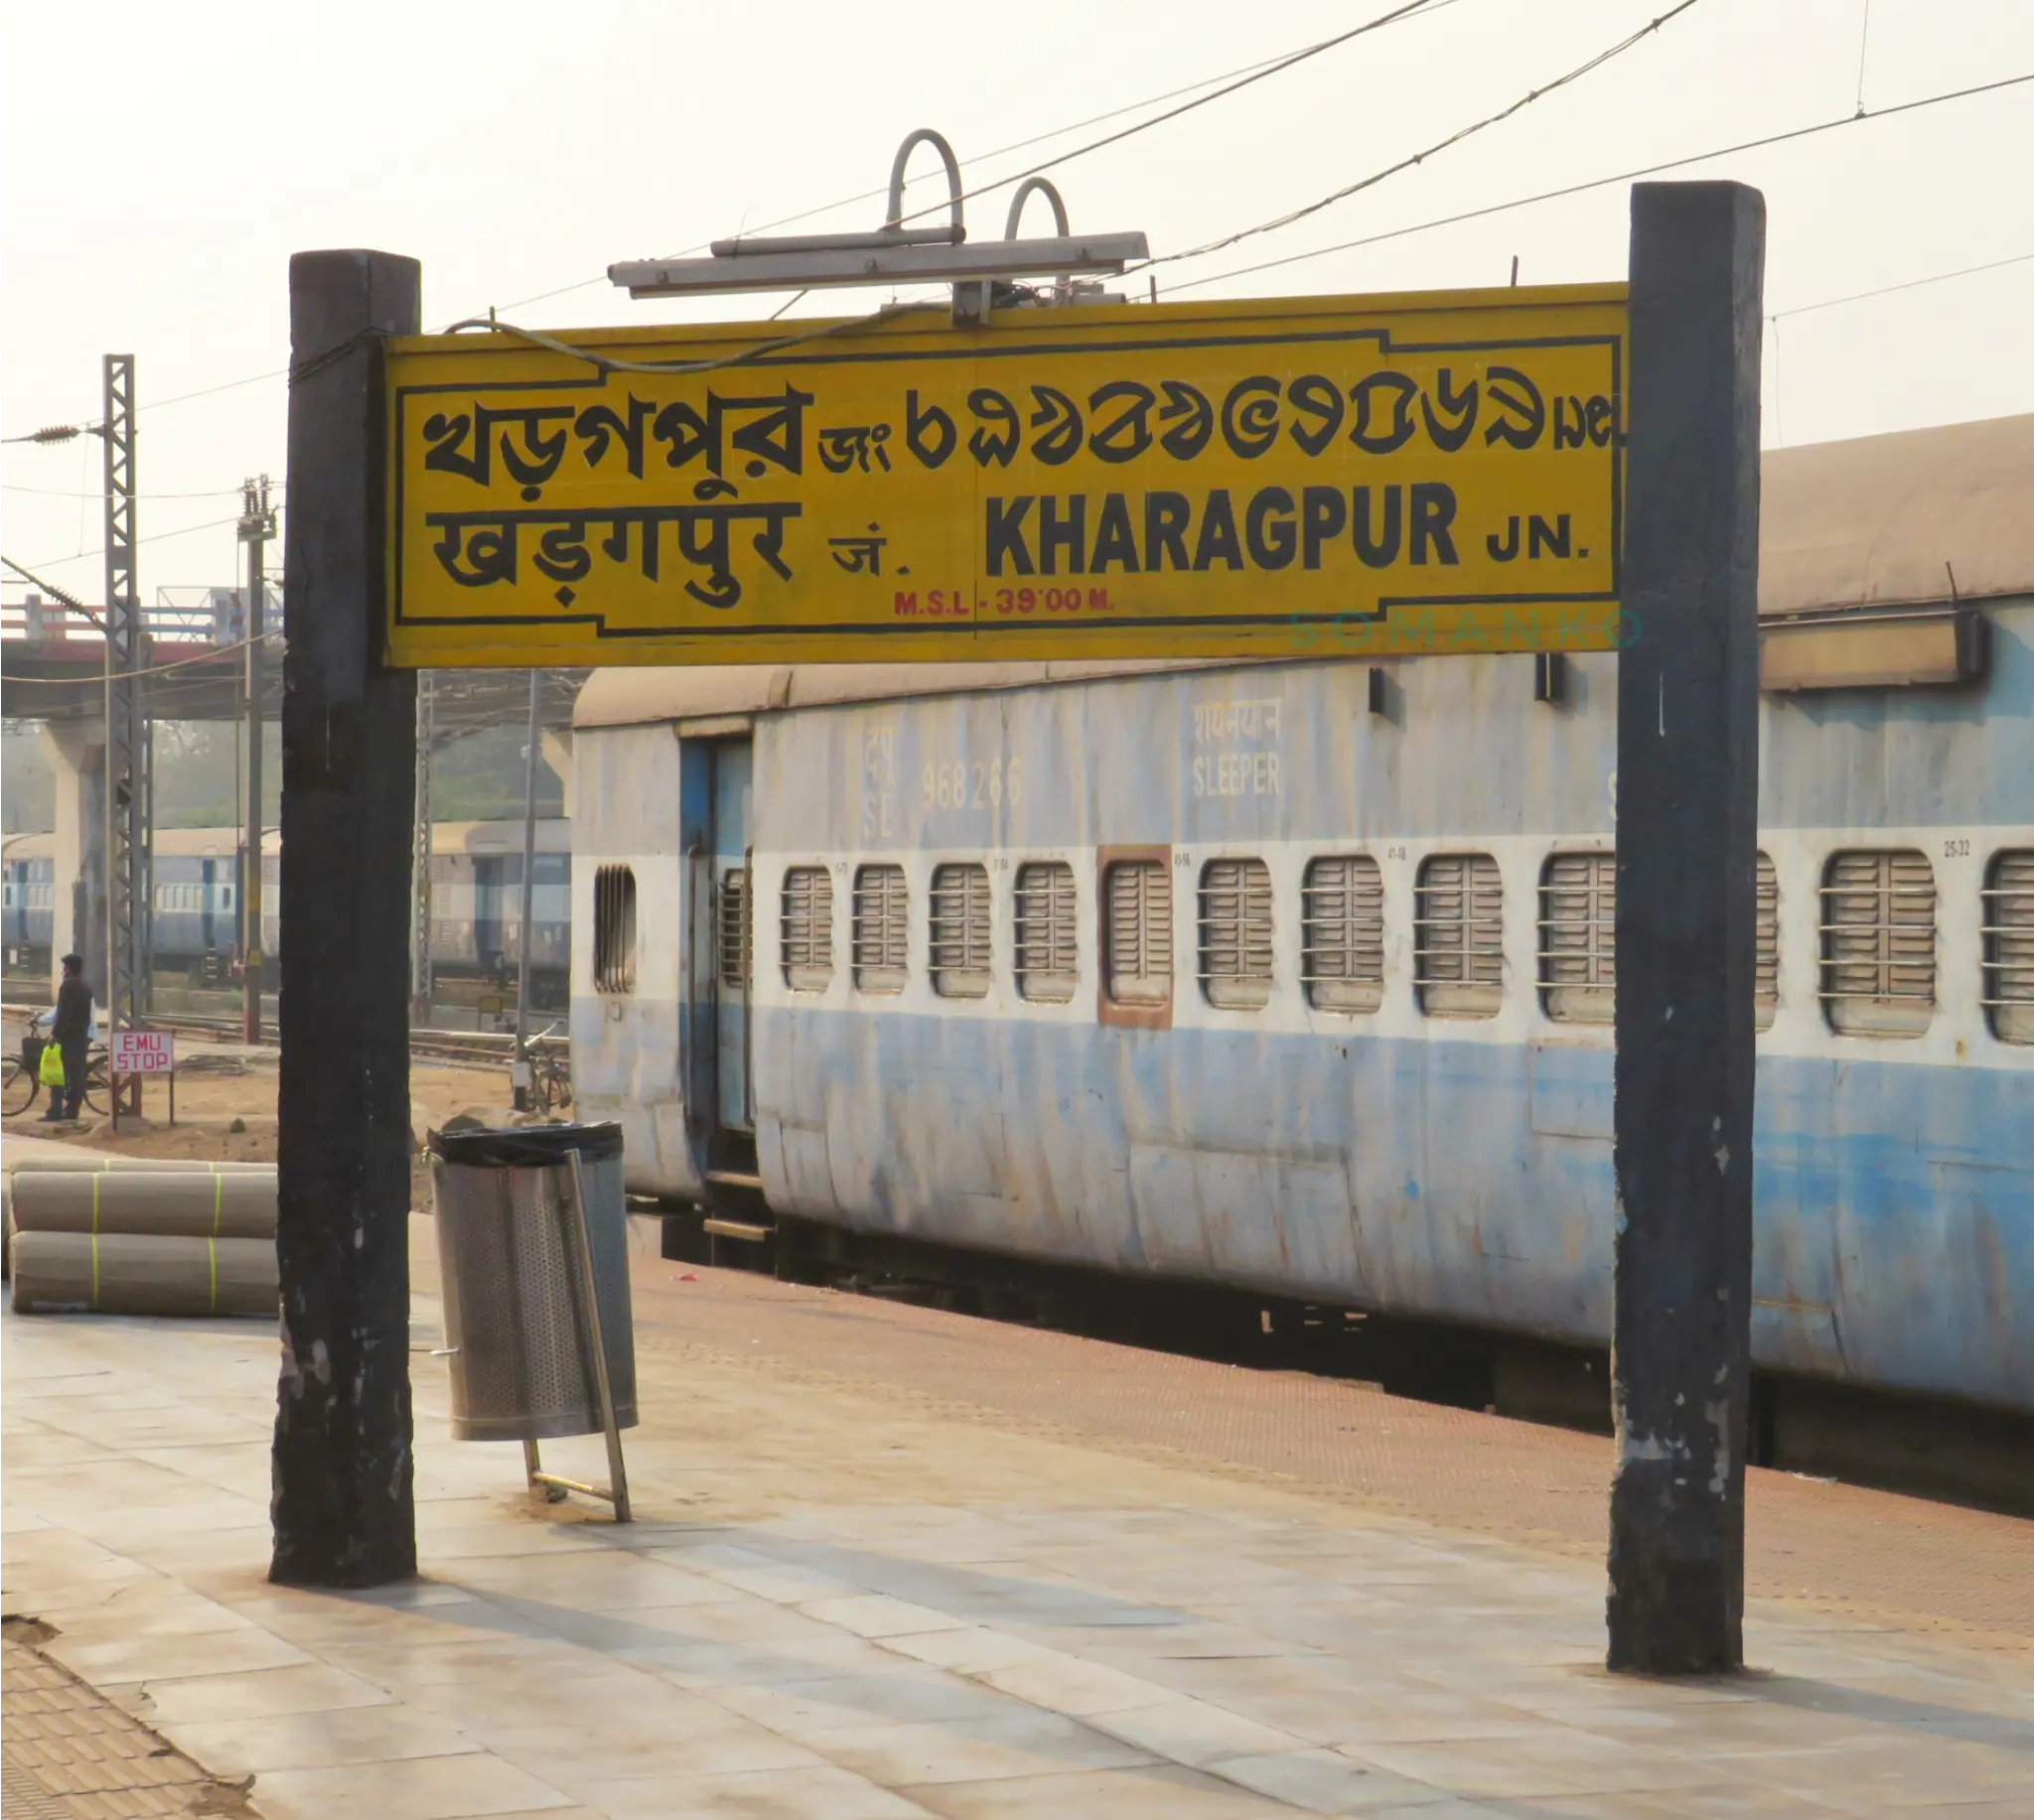 Sign at Kharagpur station, West Bengali, with Ol Chiki.